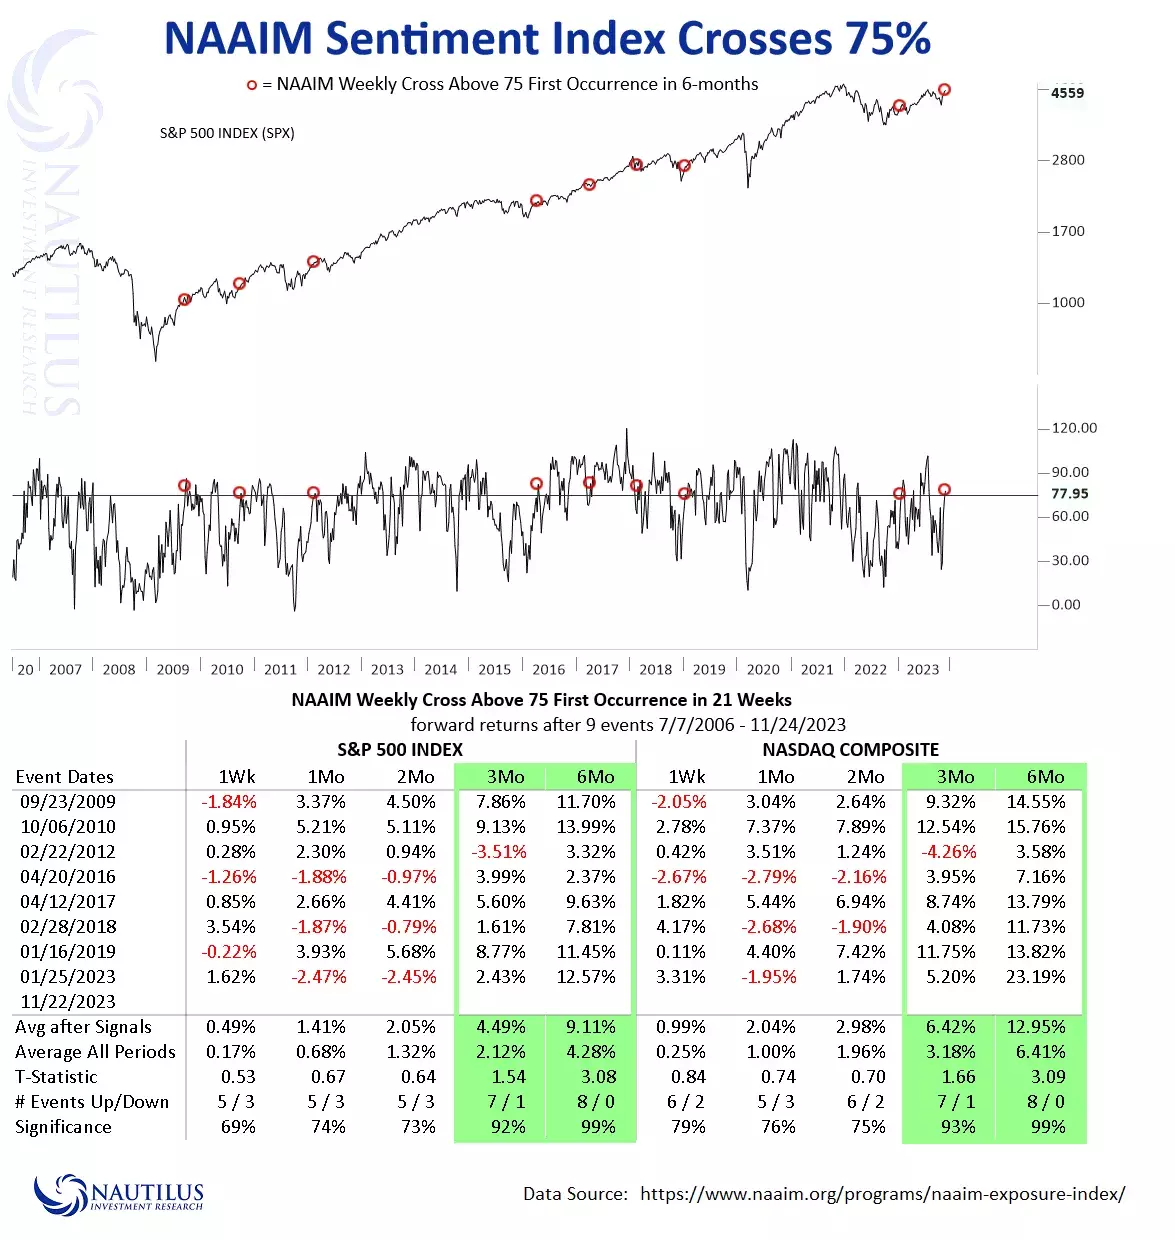 NAAIM Sentiment Index Chart and data table